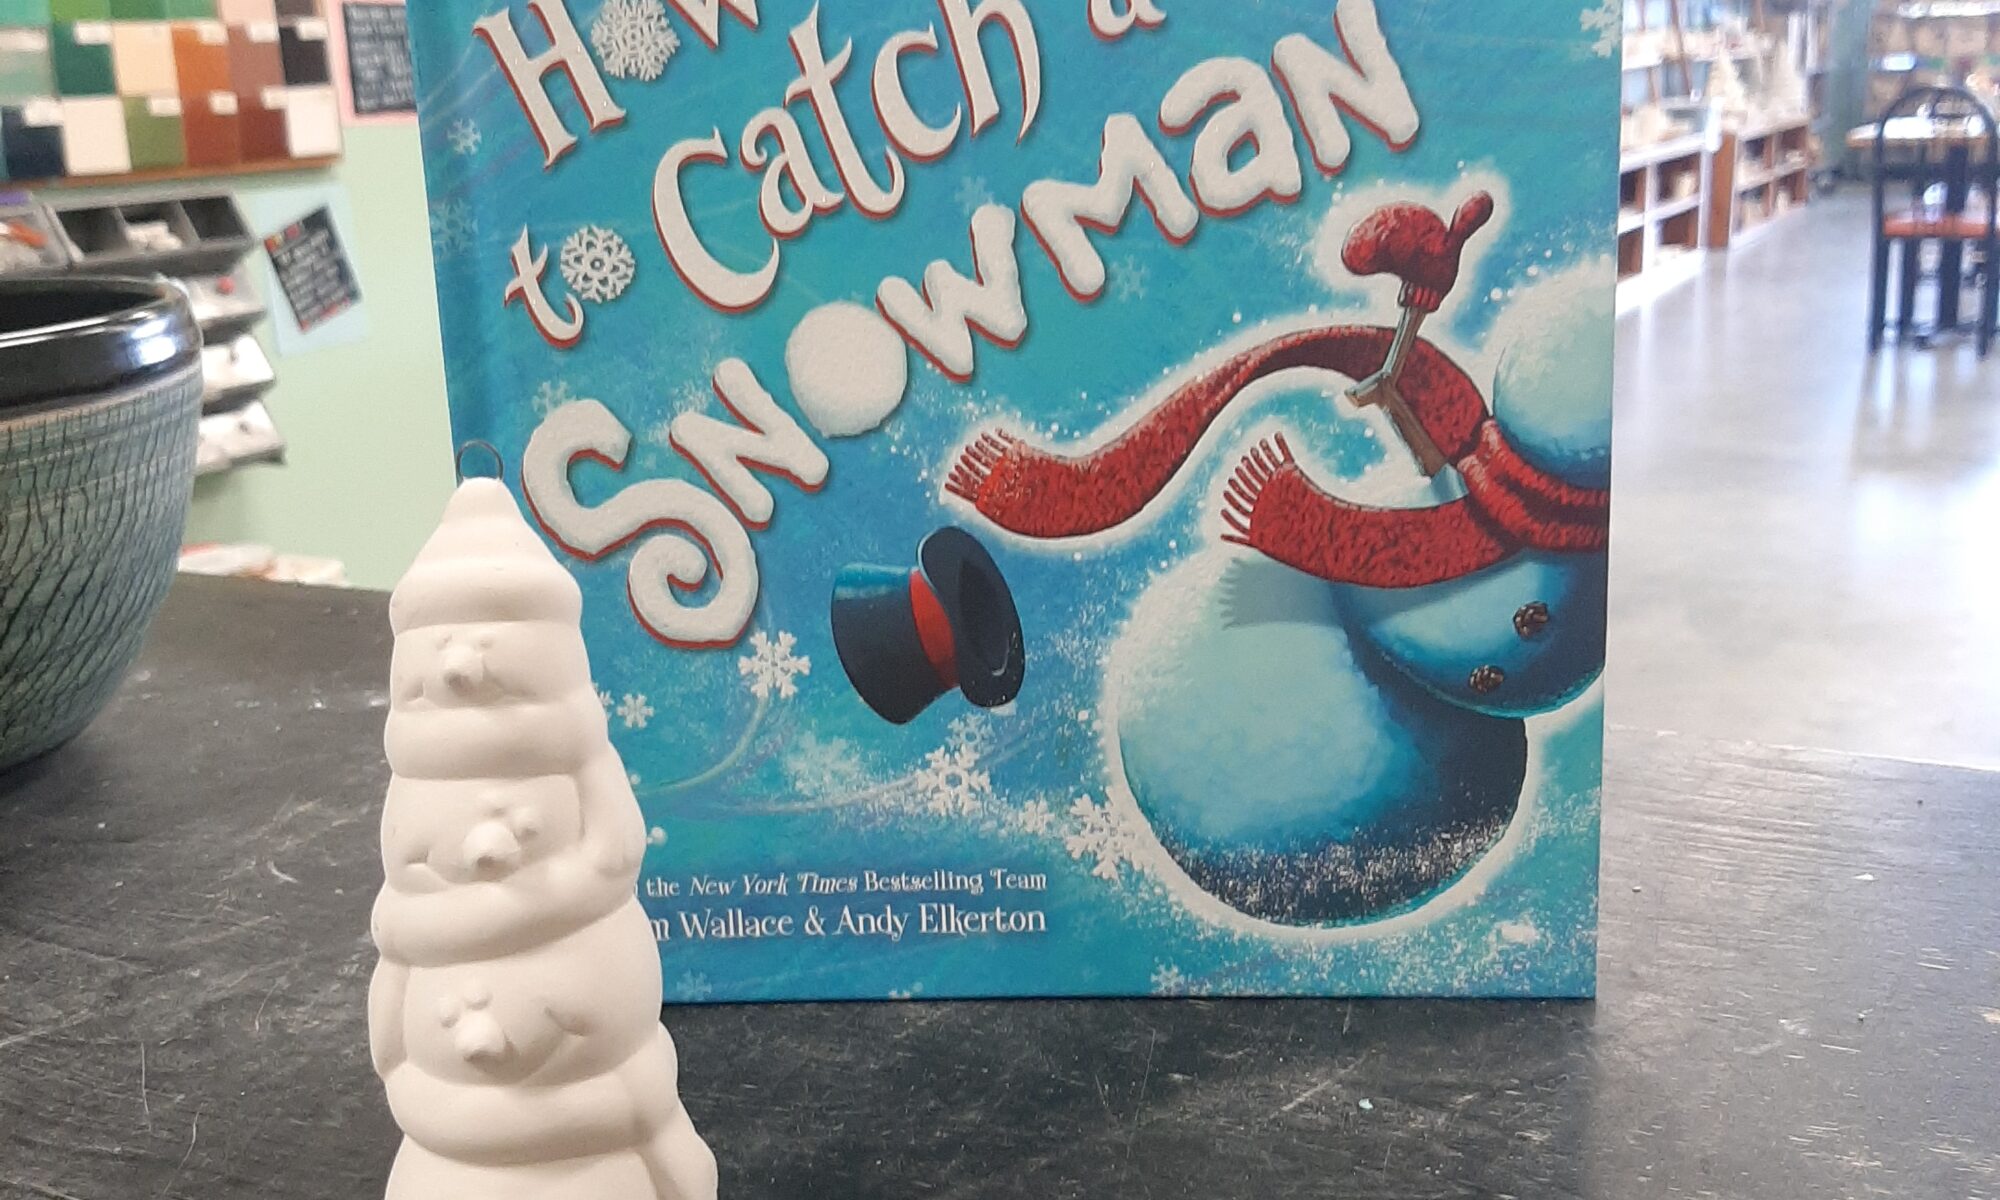 Story Time - How To Catch a Snowman